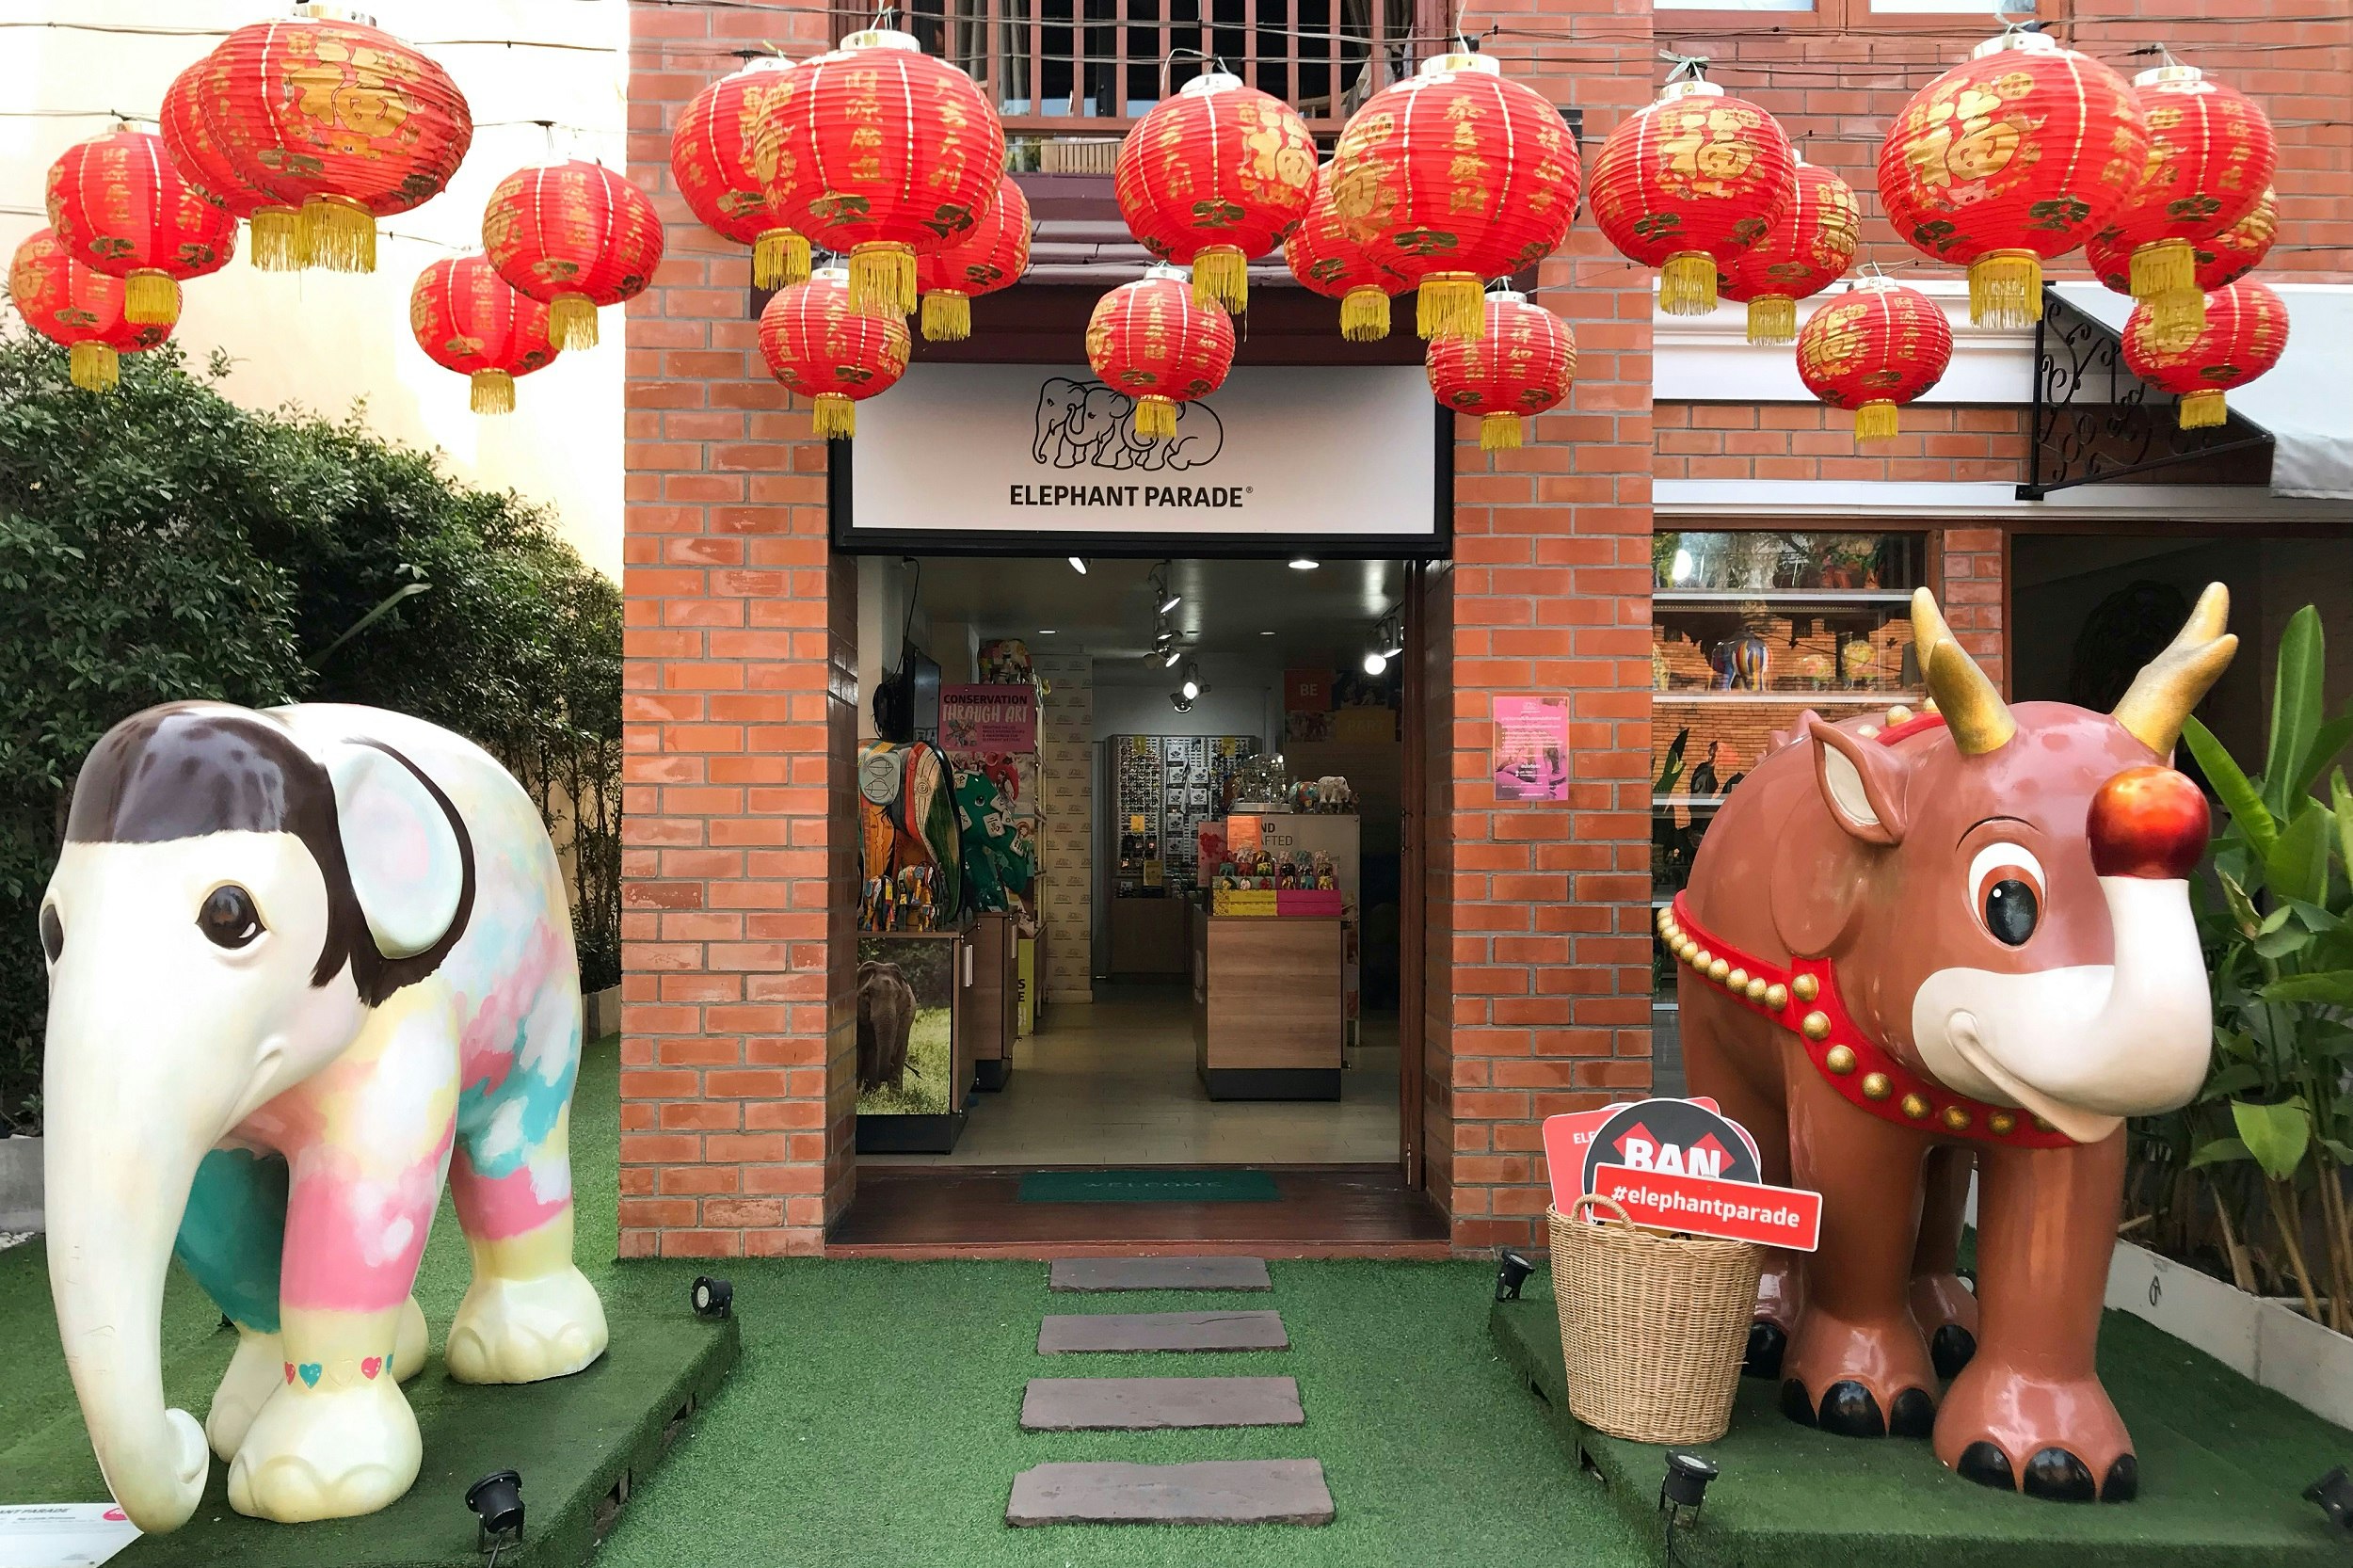 The doorway to a shop flanked by two large elephant sculptures. Above hang red paper lanterns covered in golden writing.